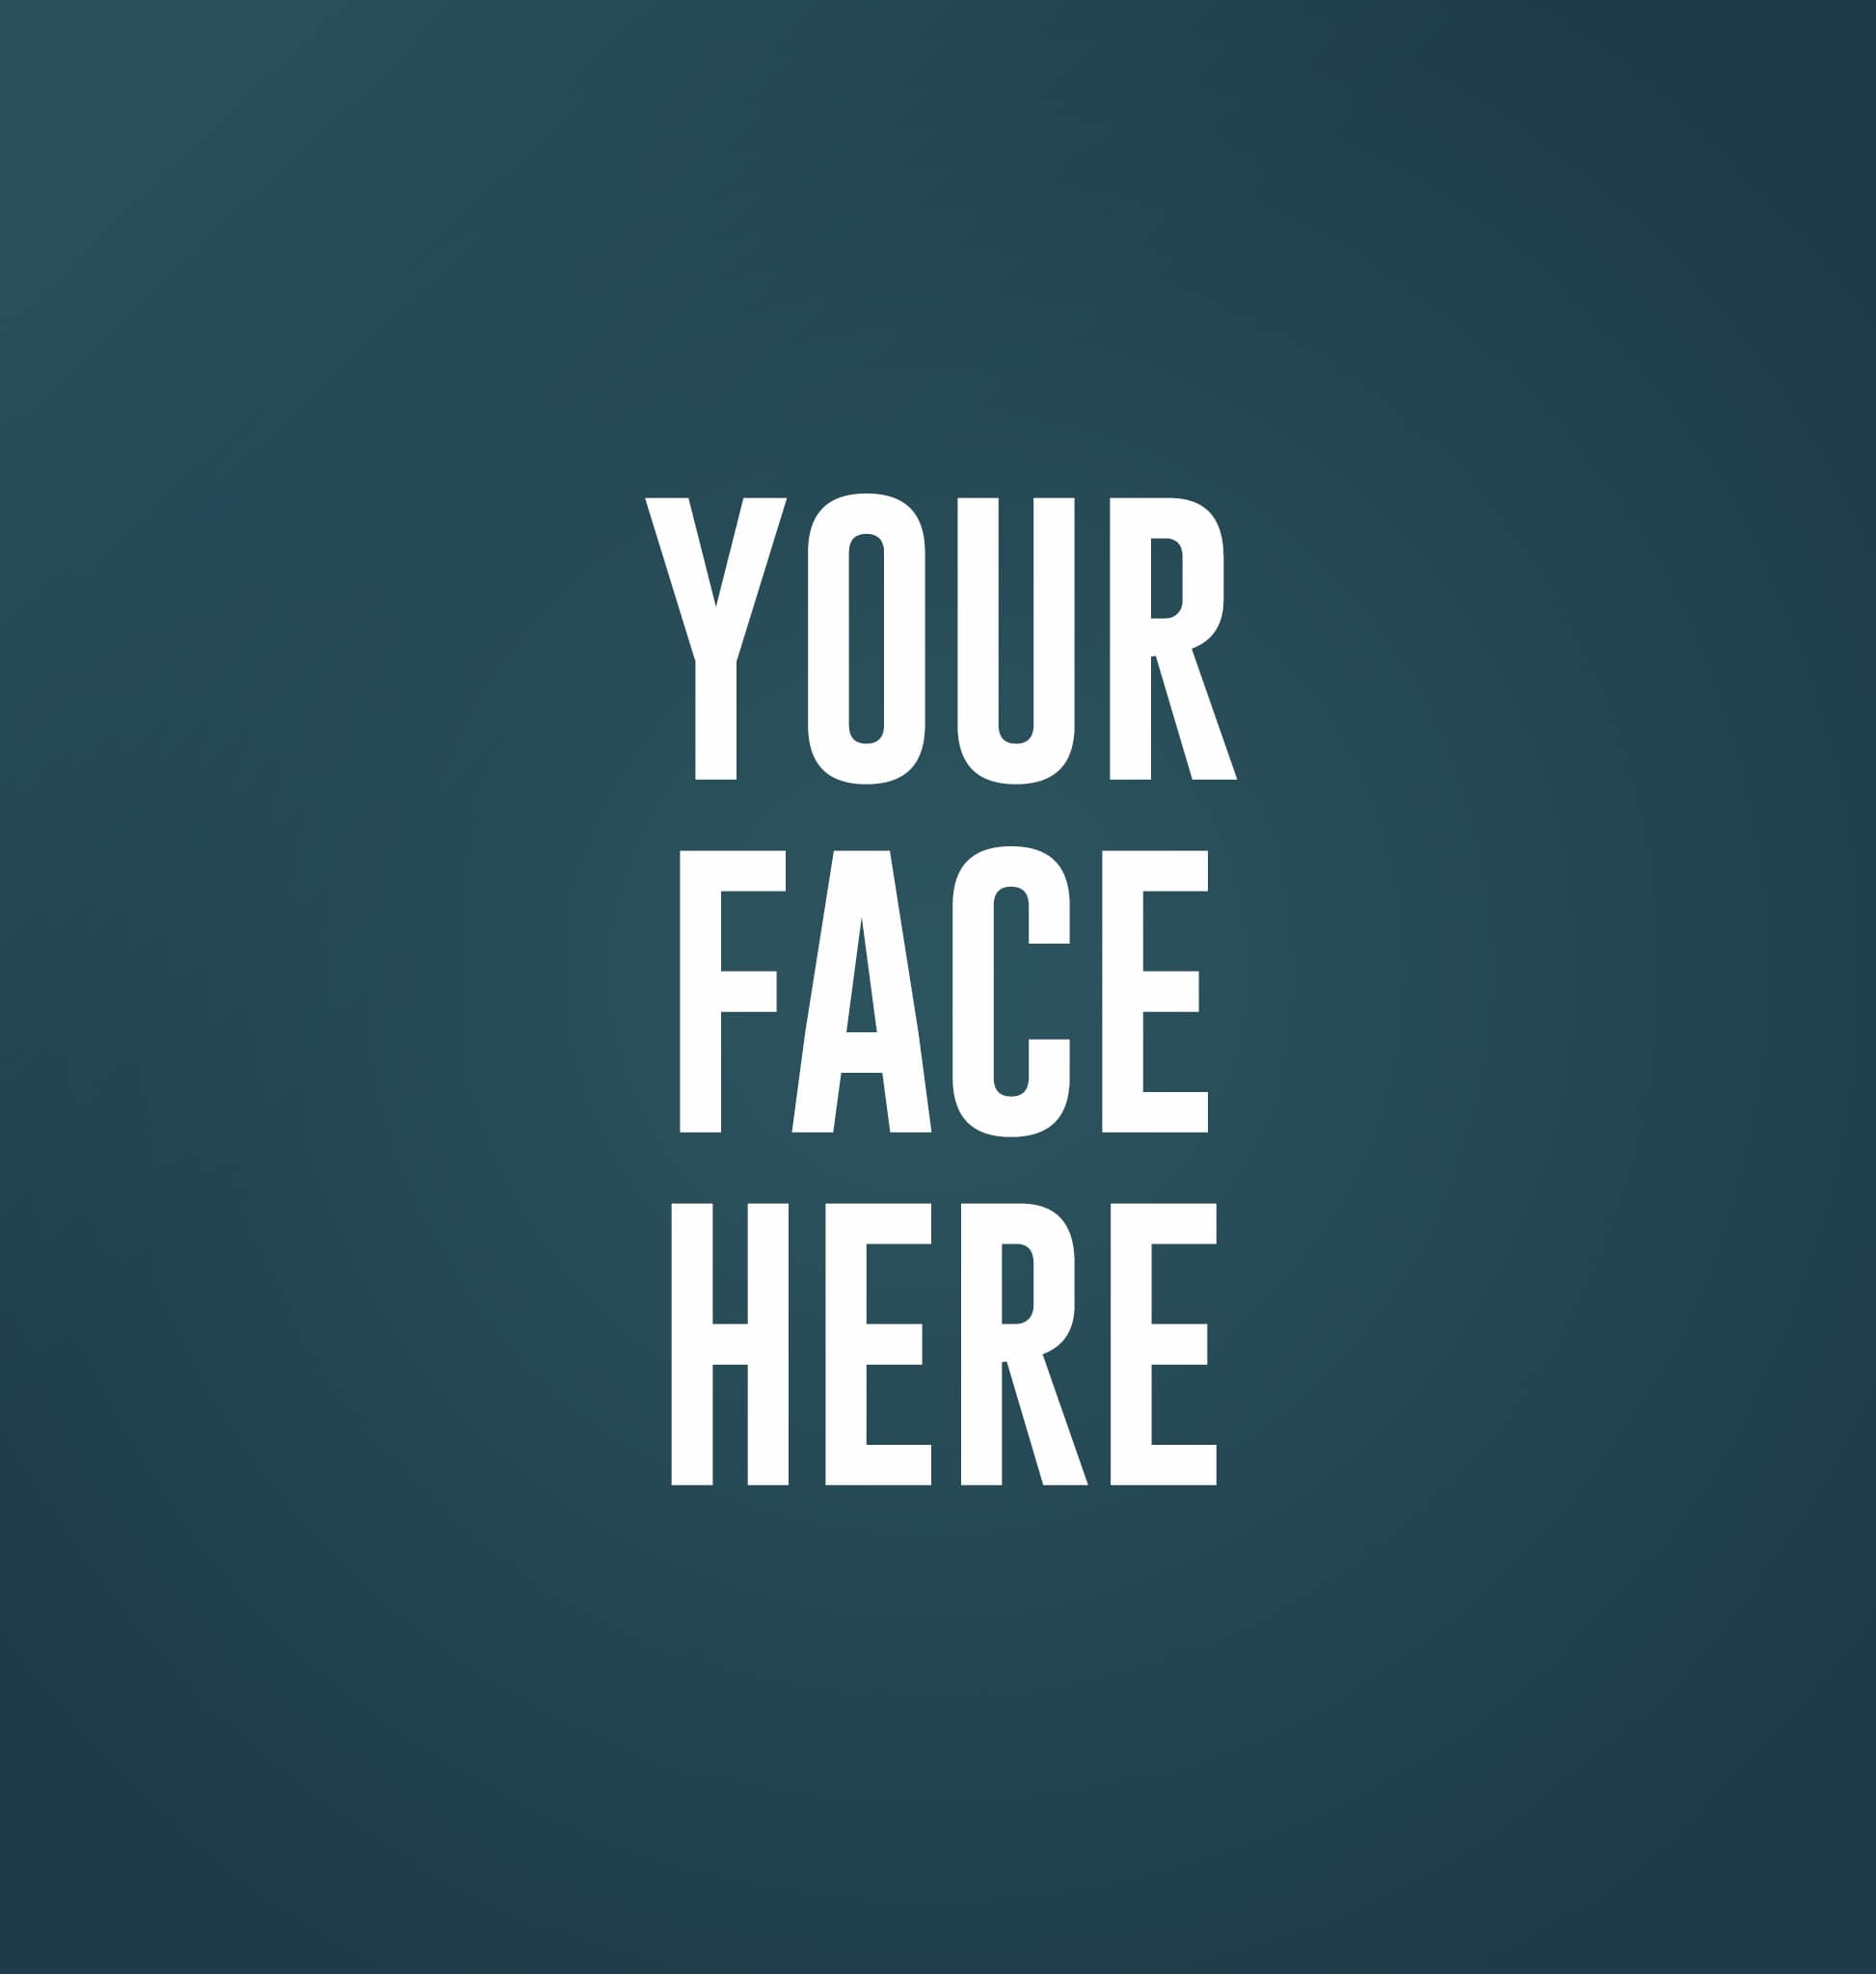 "Your Face Here"